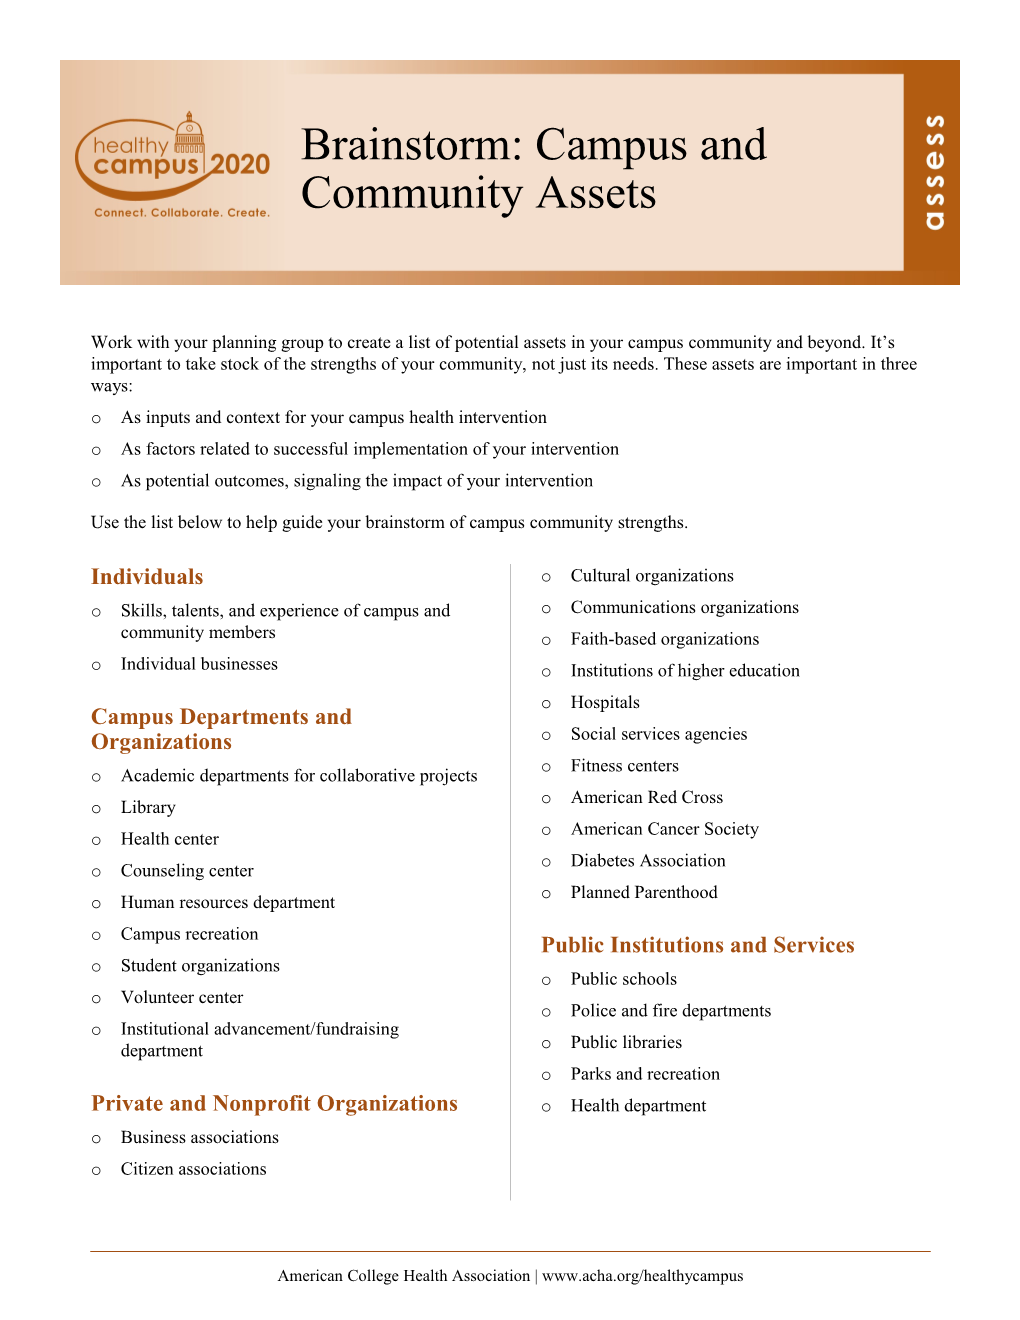 Work with Your Planning Group to Create a List of Potential Assets in Your Campus Community